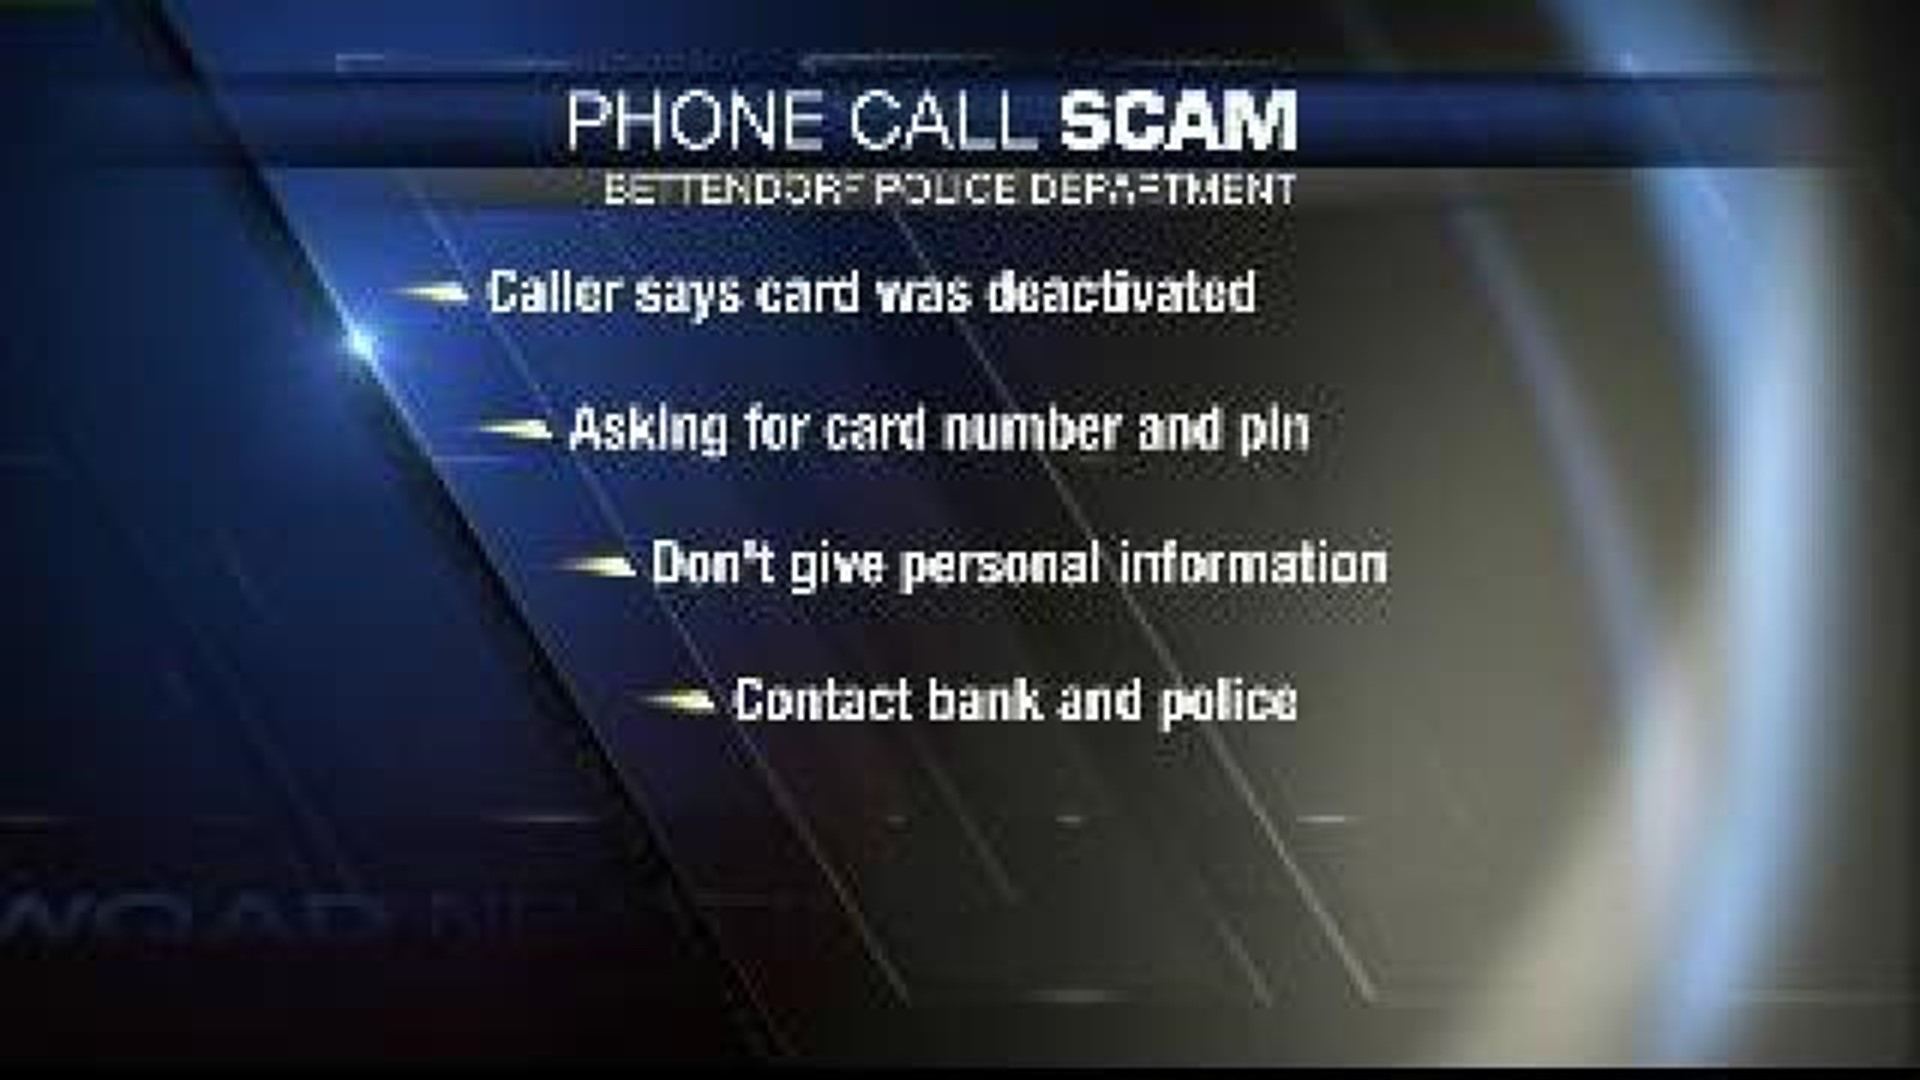 Police warn of bank card scam